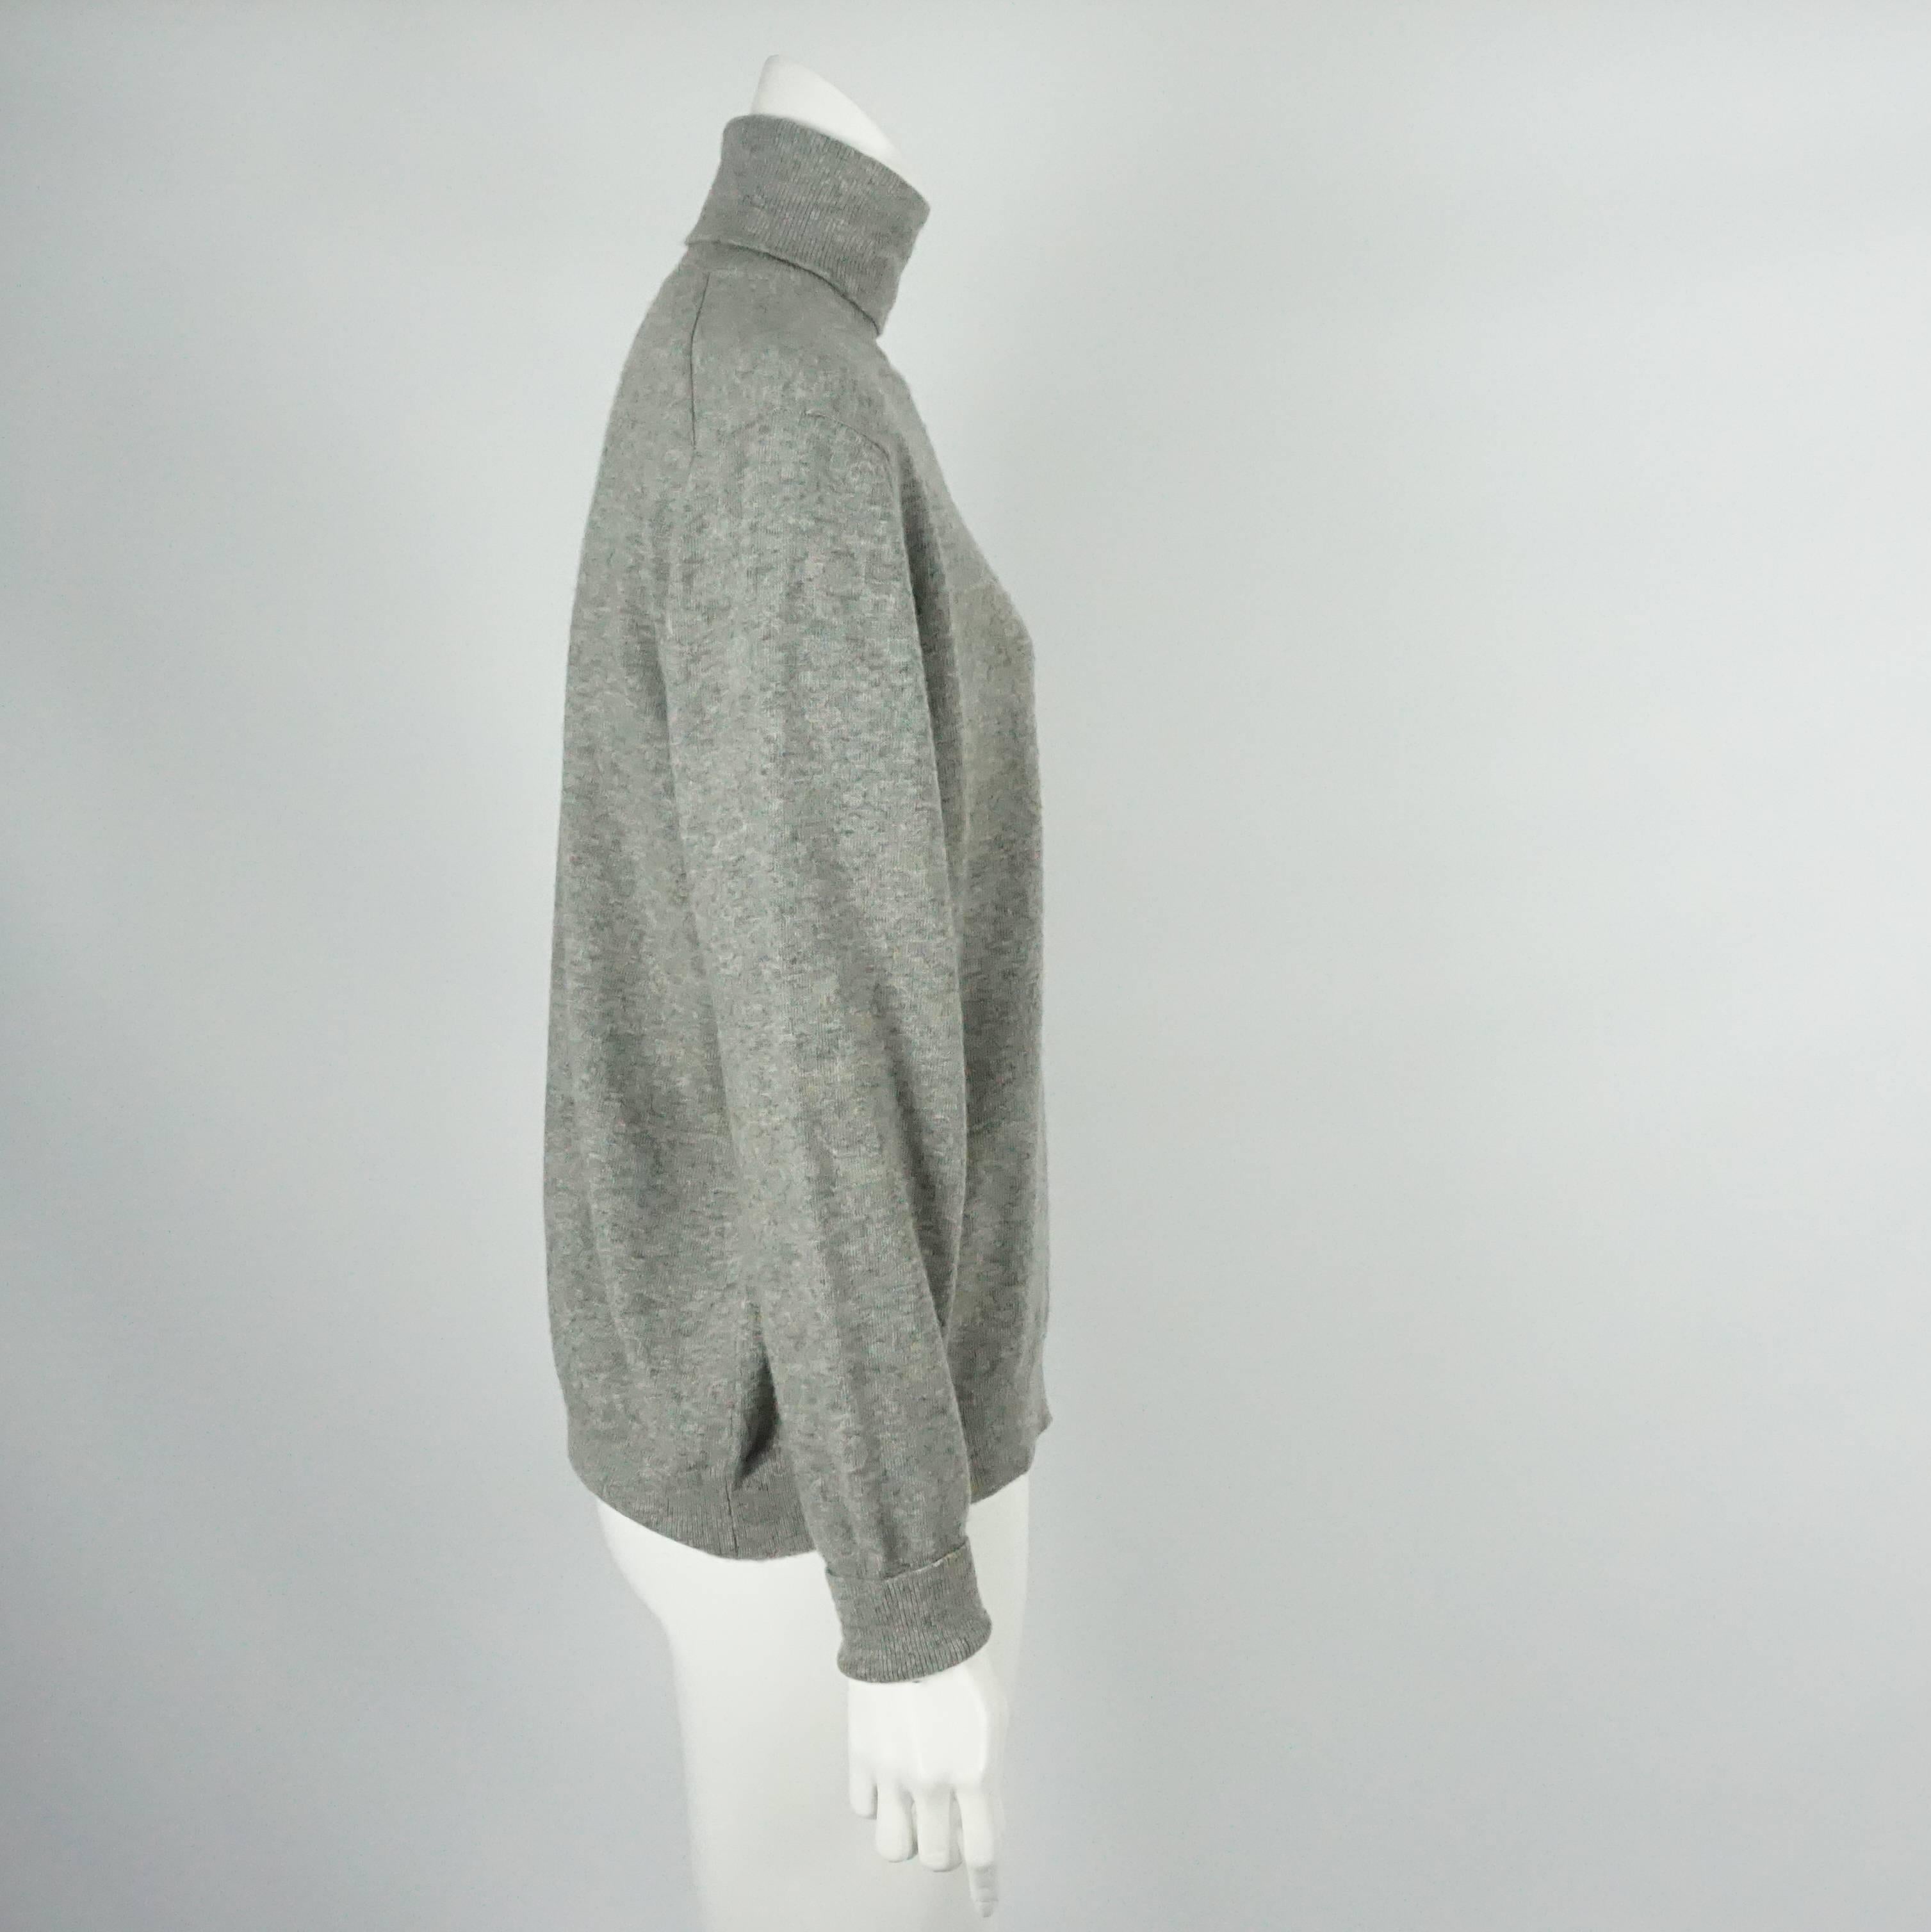 Hermes Vintage Gray Cashmere Turtleneck Sweater - 44 - Circa 1960's / 1970's. This beautiful Hermes turtleneck sweater is made of gray cashmere. It is in very good condition and is perfect for a chilly day!

Measurements
Shoulder to Shoulder: